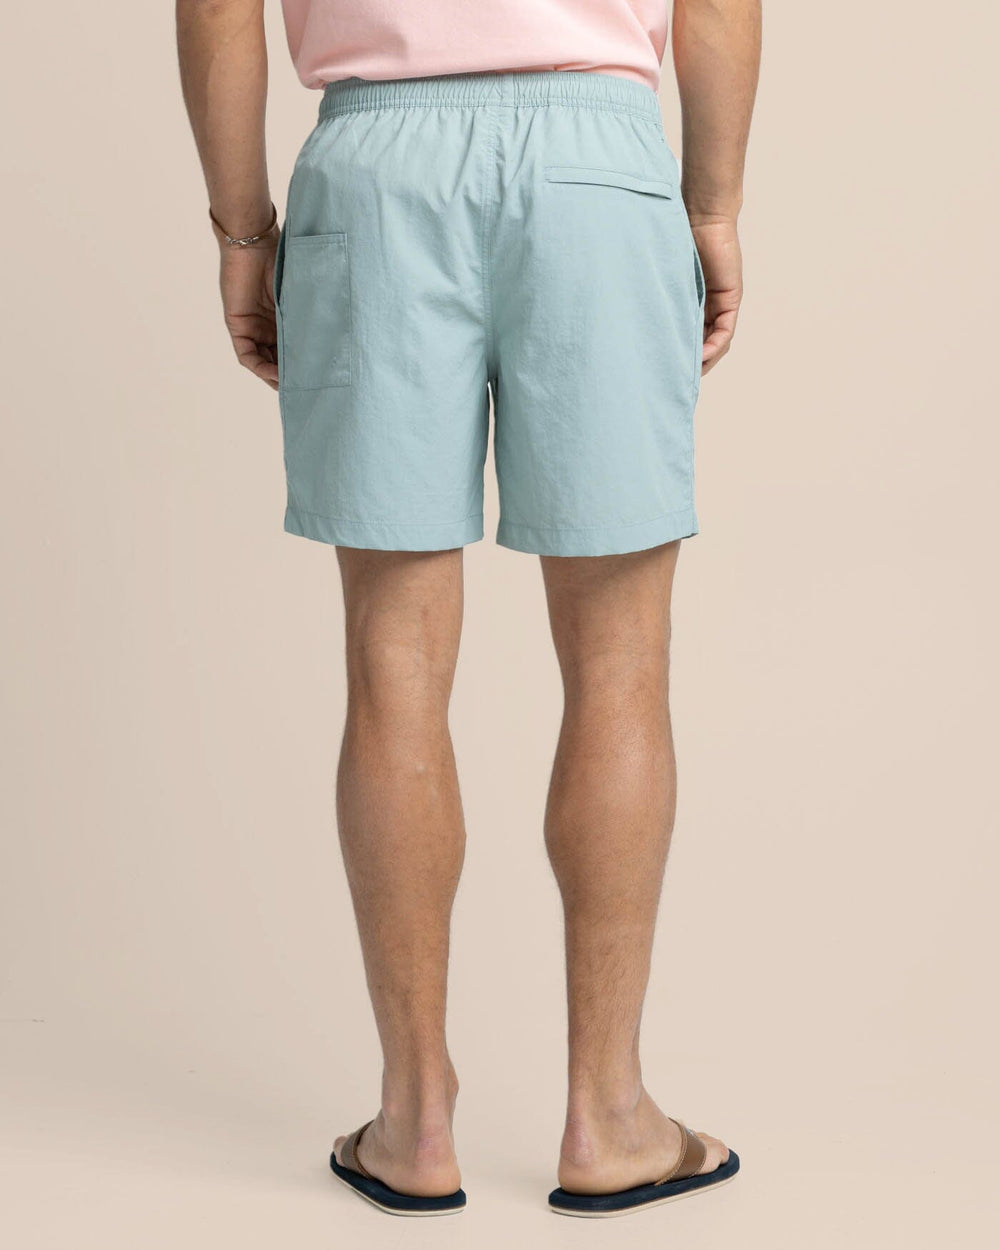 The back view of the Southern Tide Shoreline 6 Nylon Short by Southern Tide - Green Surf